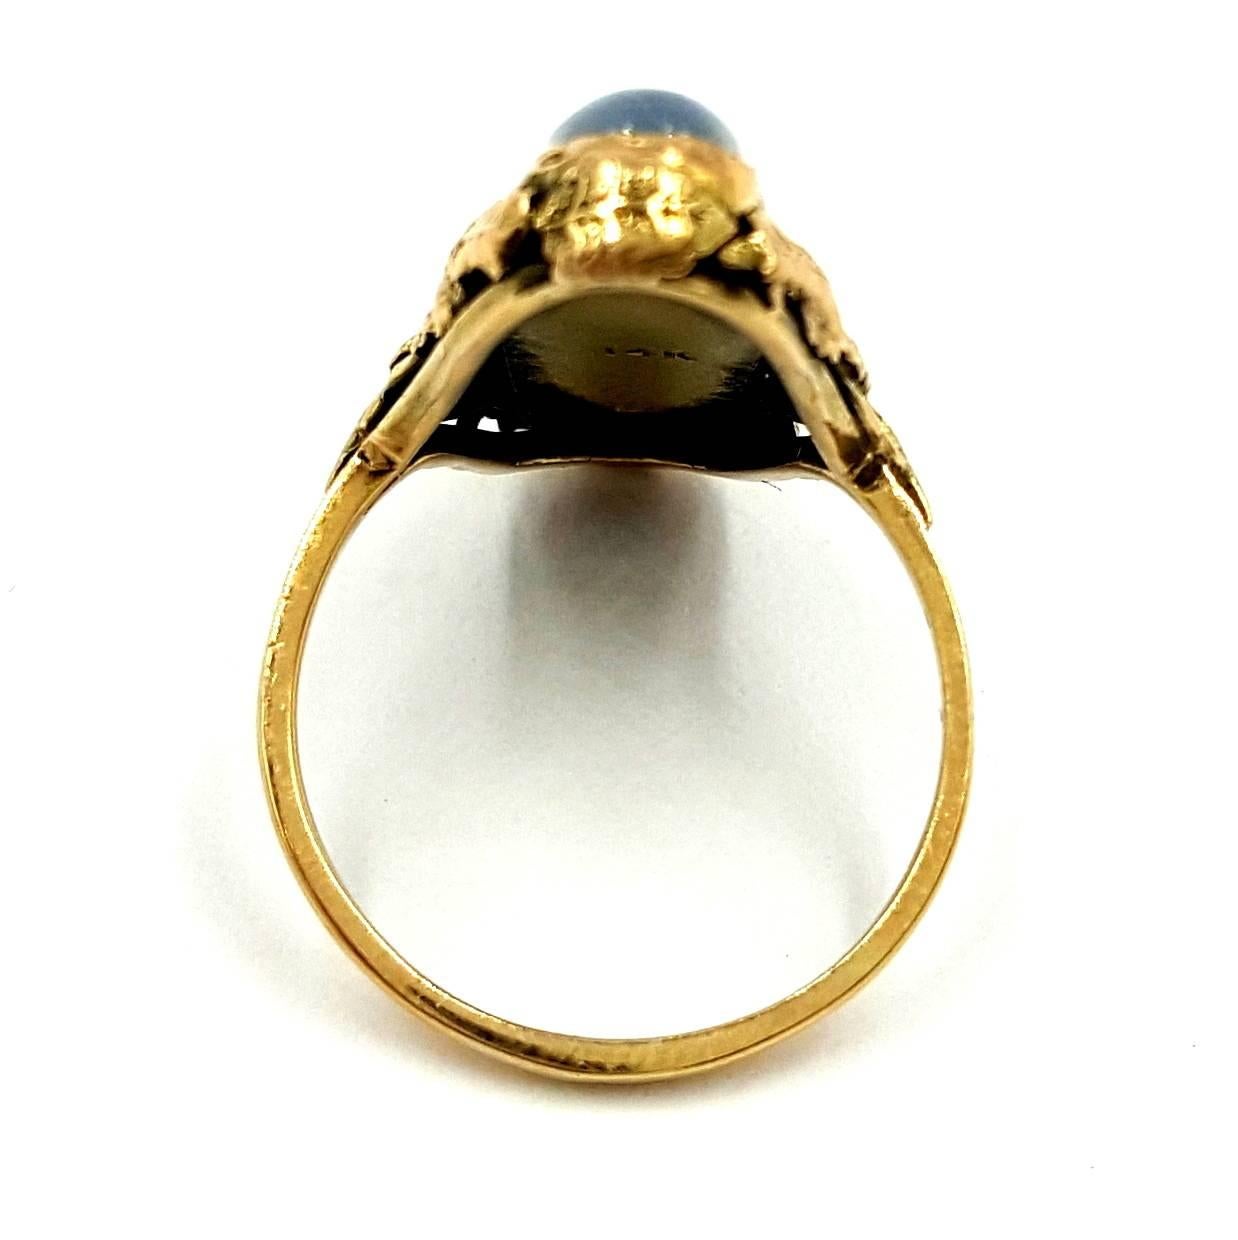 Circa 1894 to 1924 Arts and Crafts Gorgeous Vivid Blue Moon Stone 14kt Gold Ring For Sale 1